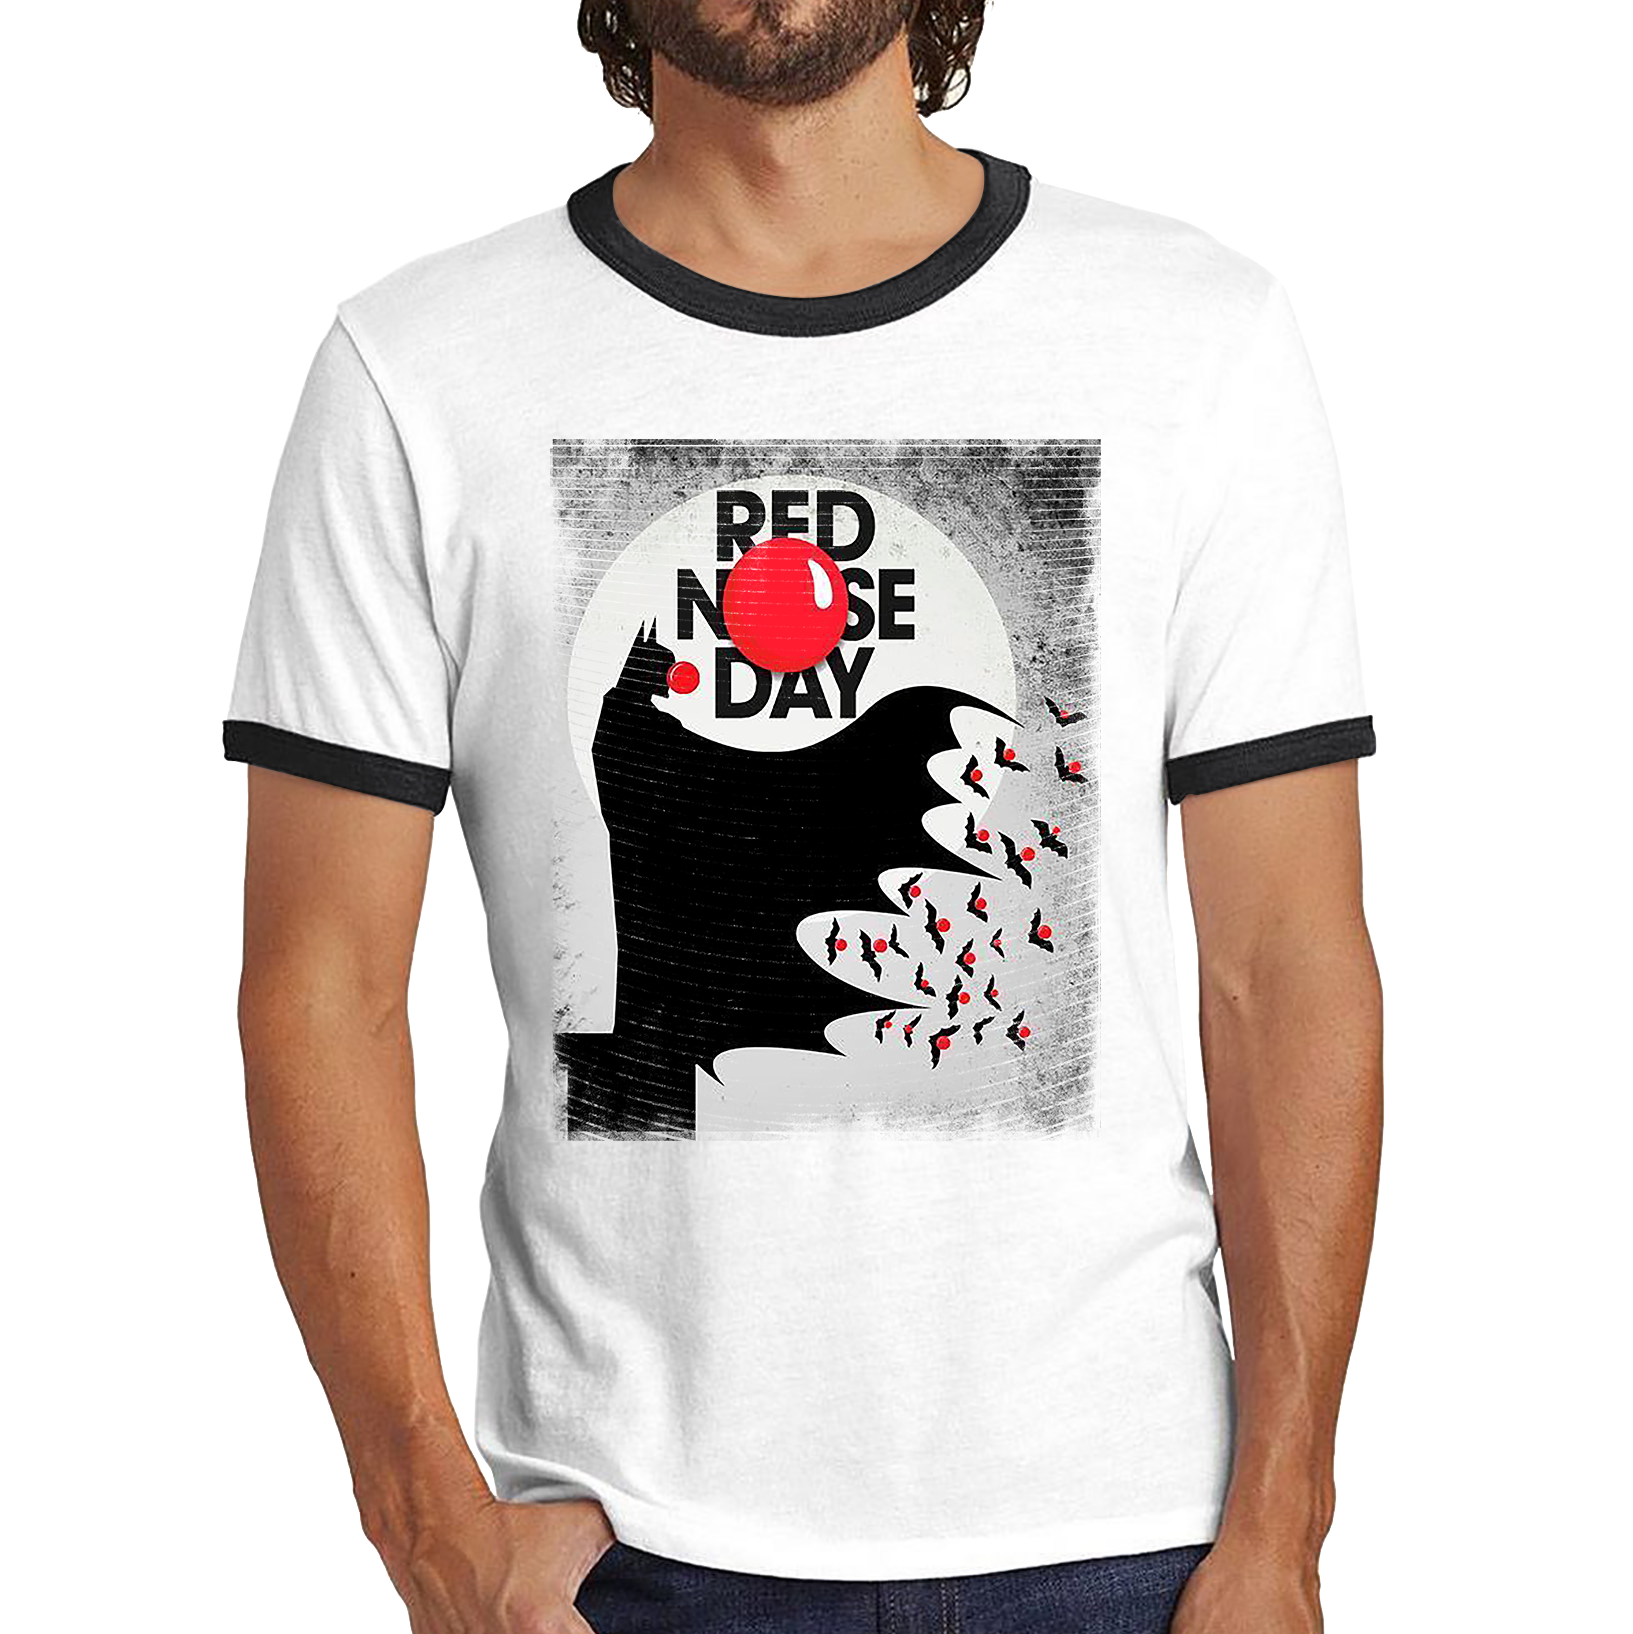 Batman Red Nose Day Ringer T Shirt. 50% Goes To Charity